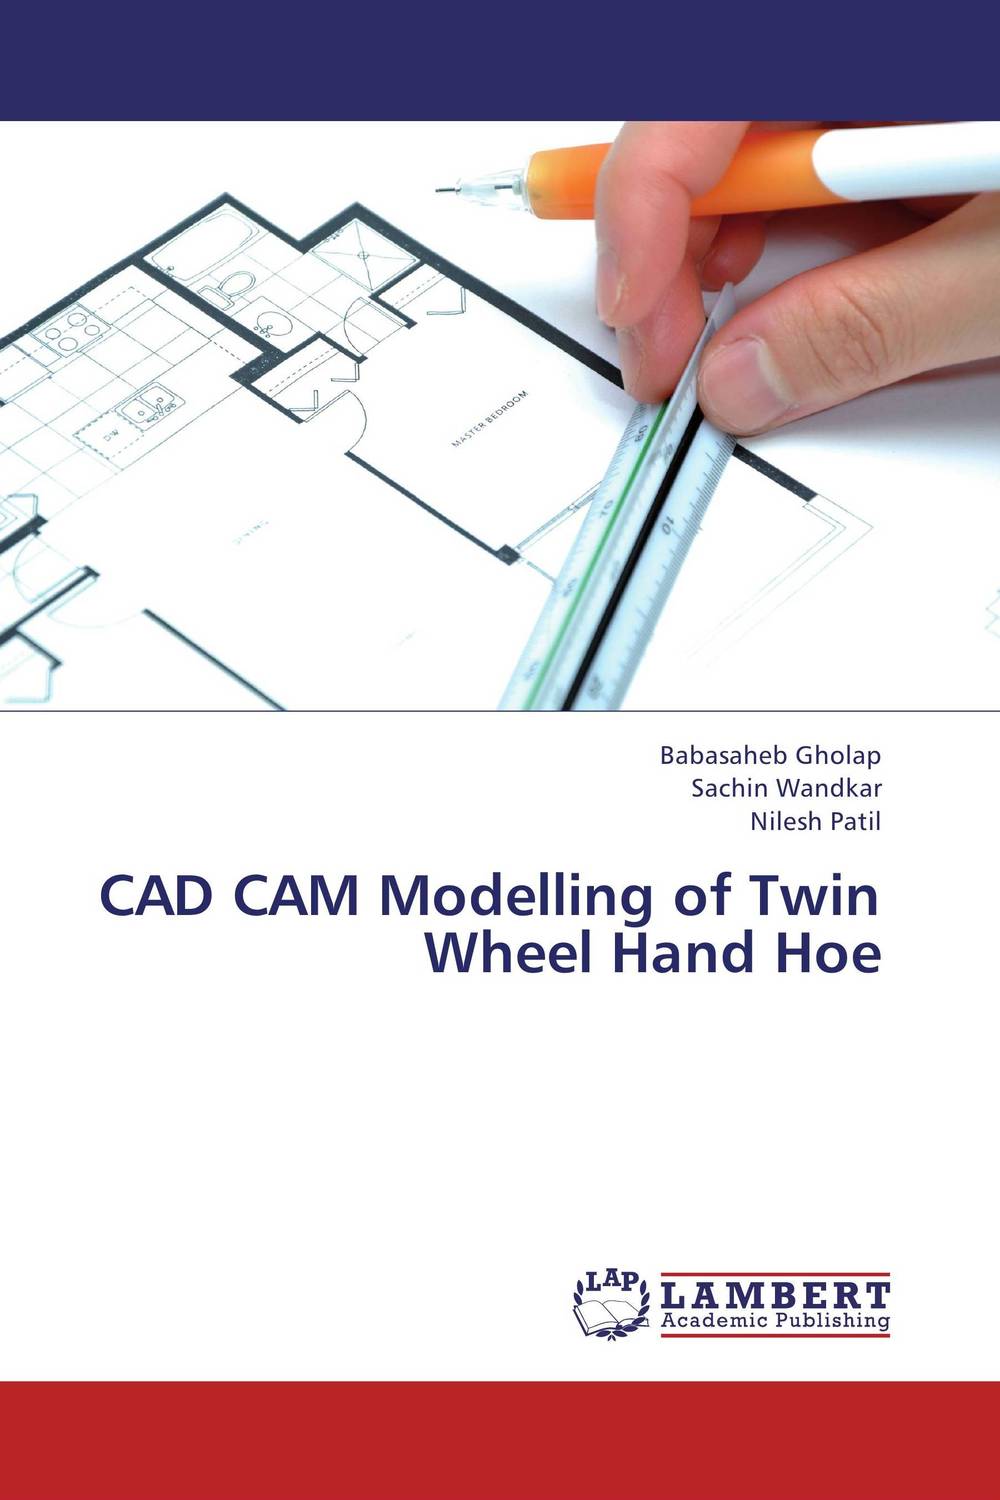 CAD CAM Modelling of Twin Wheel Hand Hoe